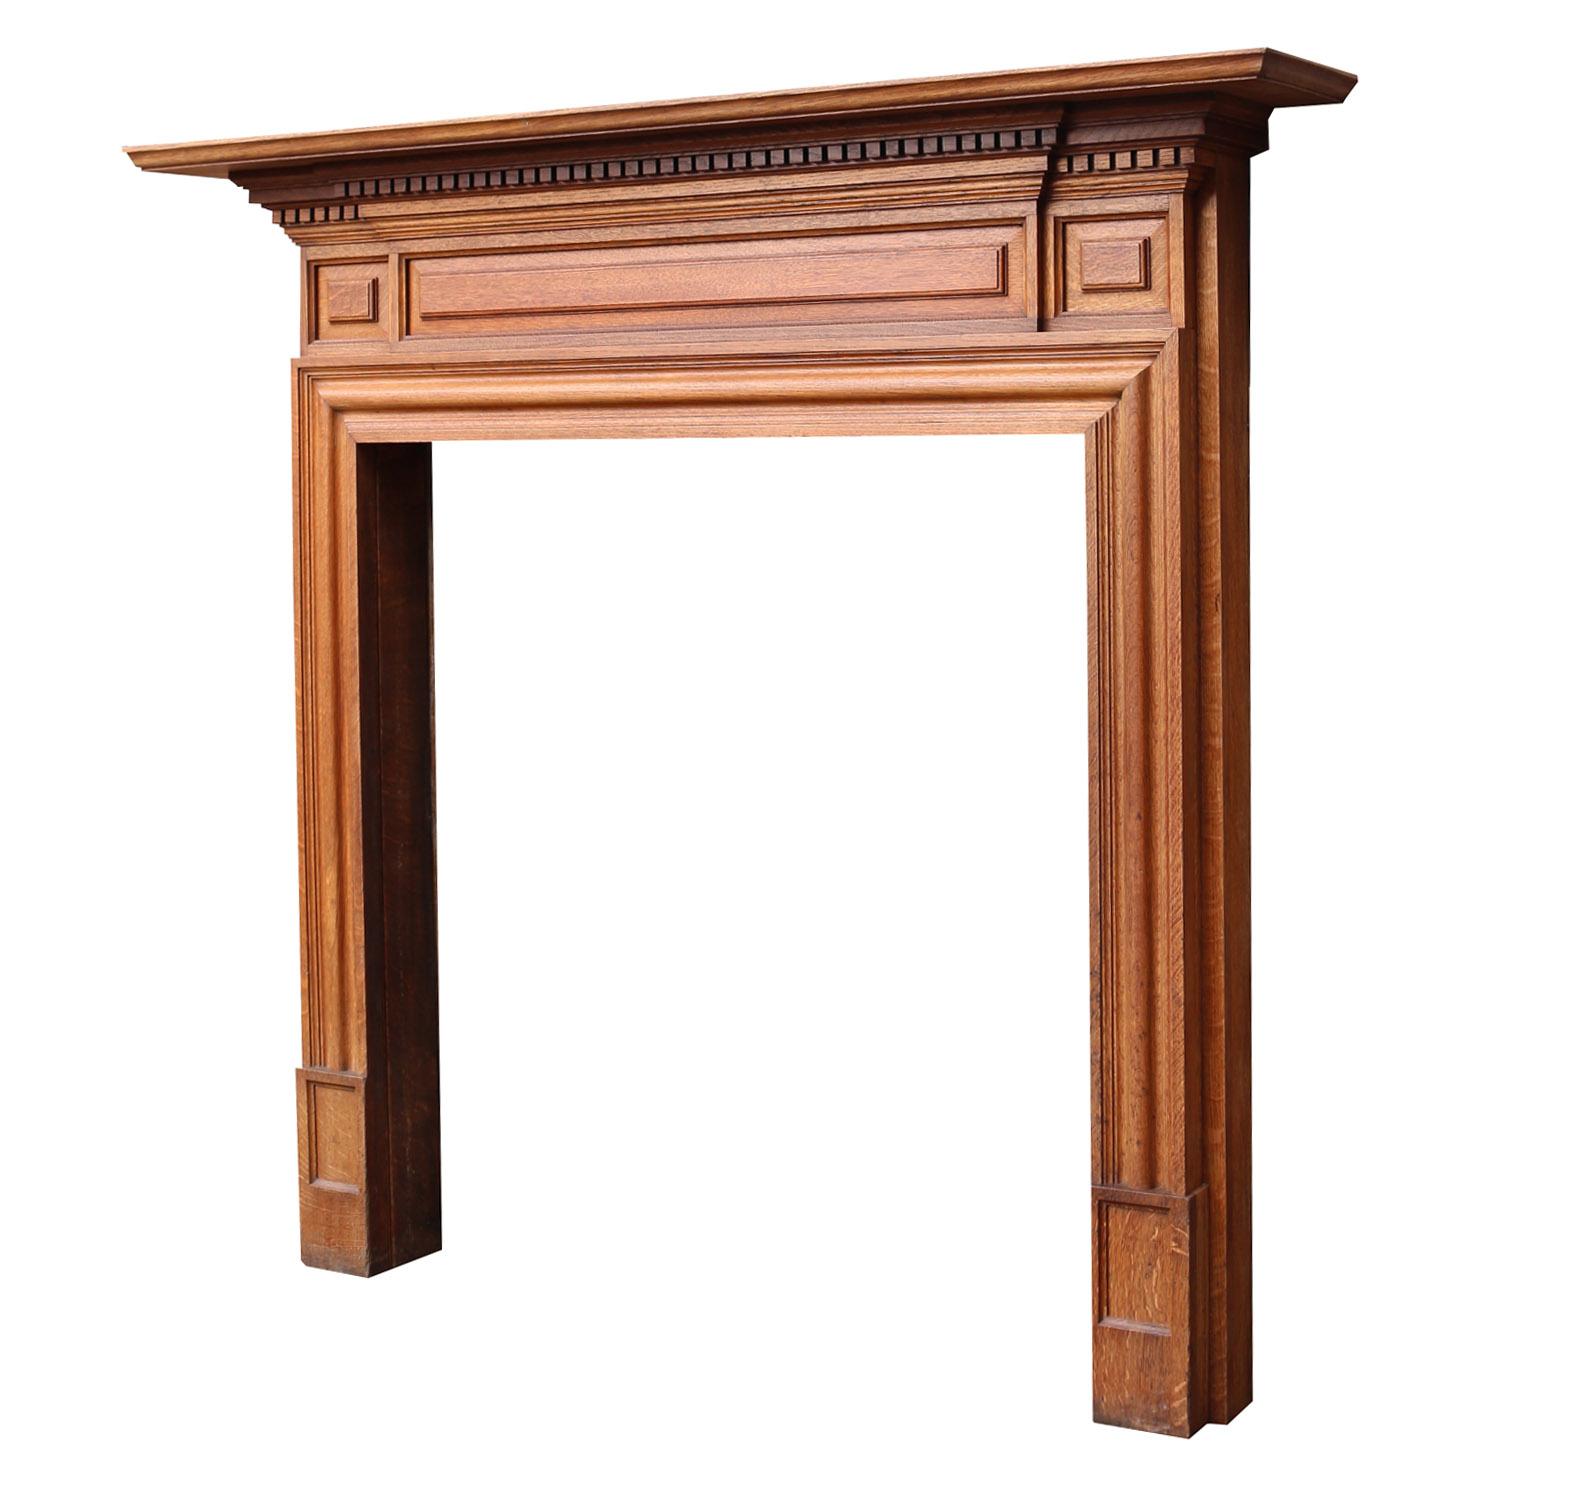 This fire surround has a striped finish and is in excellent condition.
Weight 27 kg
Opening Height 97 cm
Opening Width 91 cm
Width Between Legs 115 cm